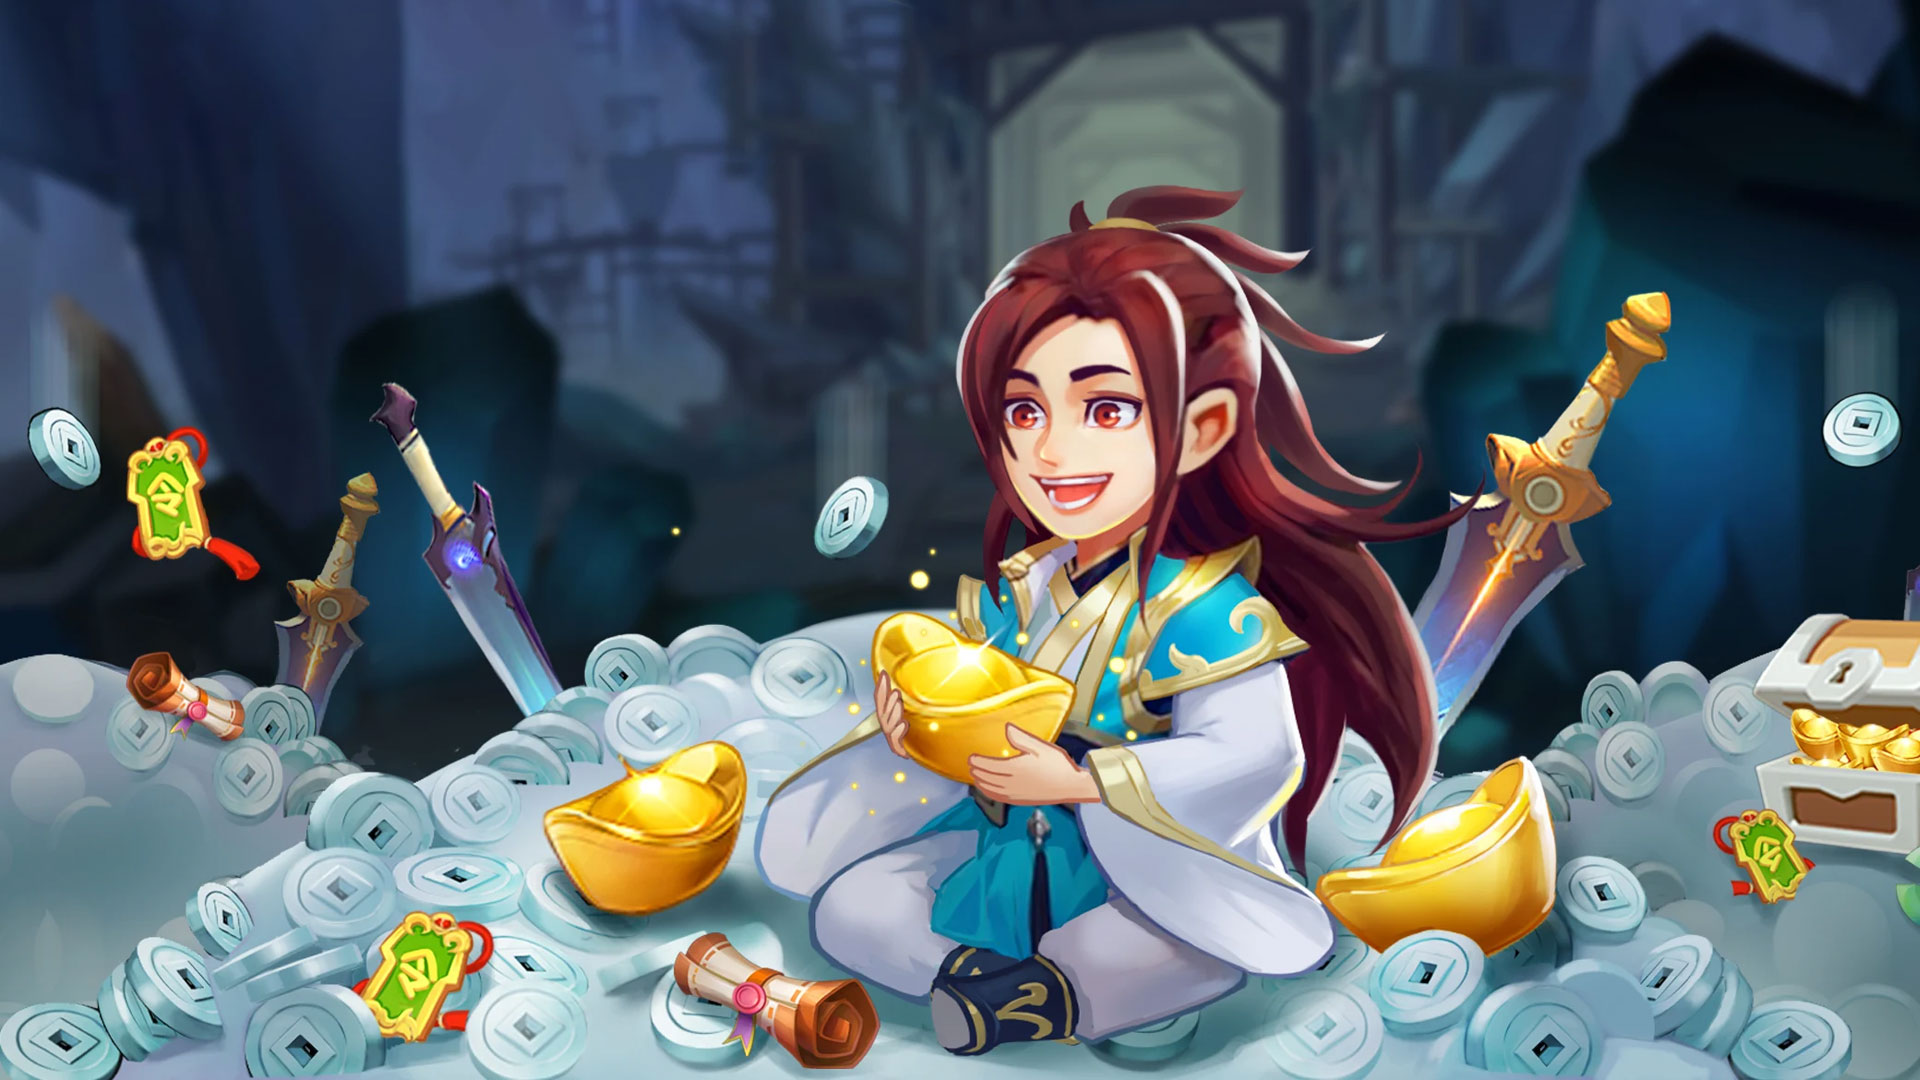 Idle Master: Wuxia Manager RPG